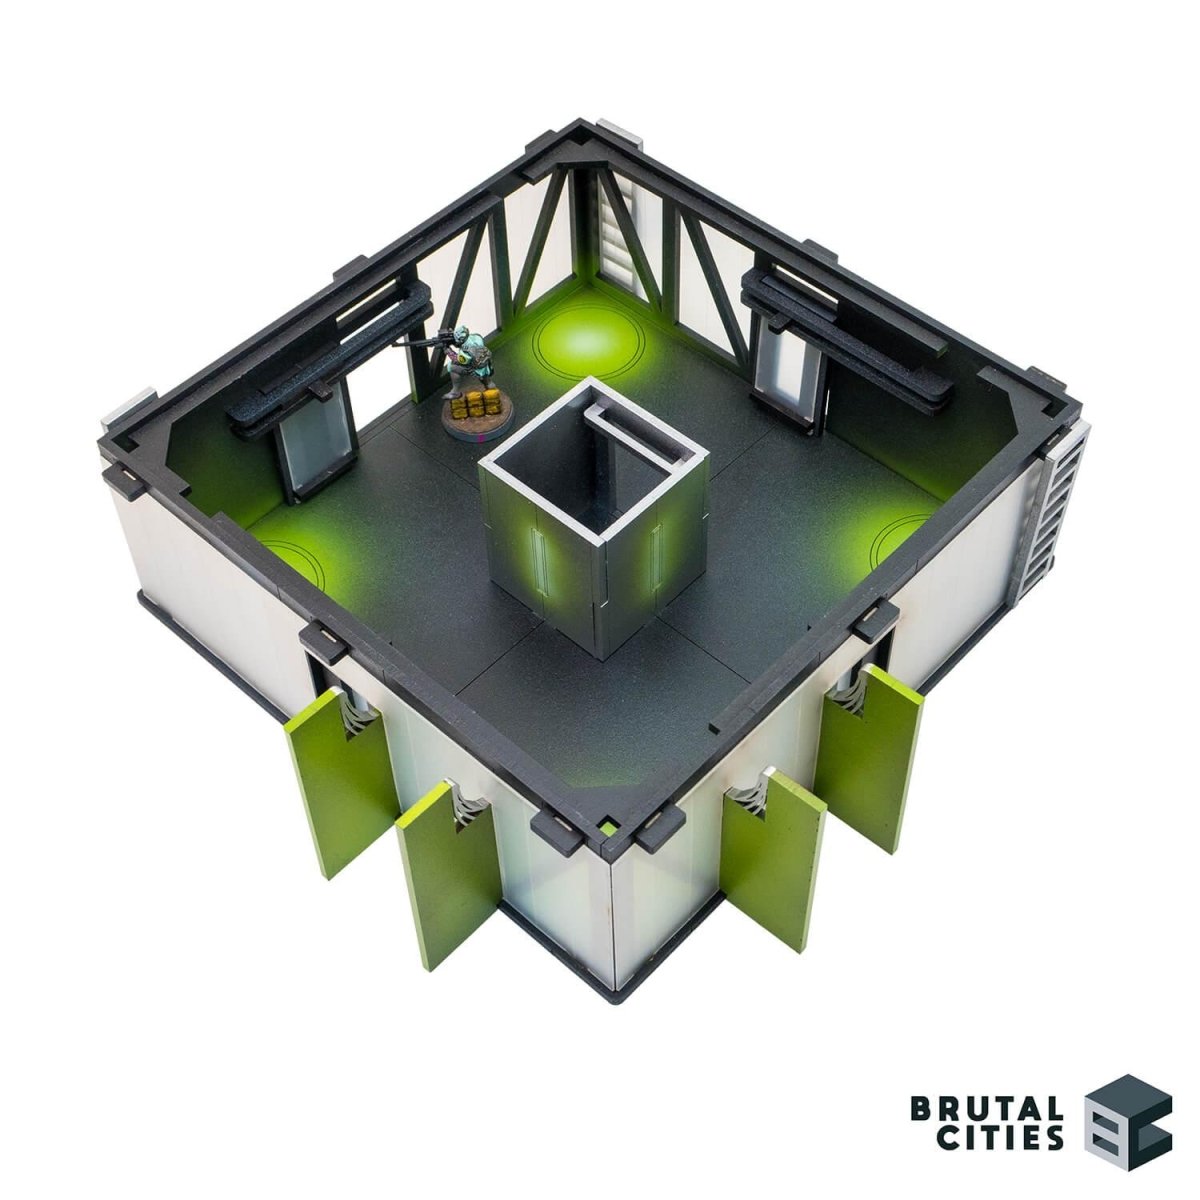 Infinity objective room square terrain, roofless & infinity mini inside. painted black with green details and clear plastic